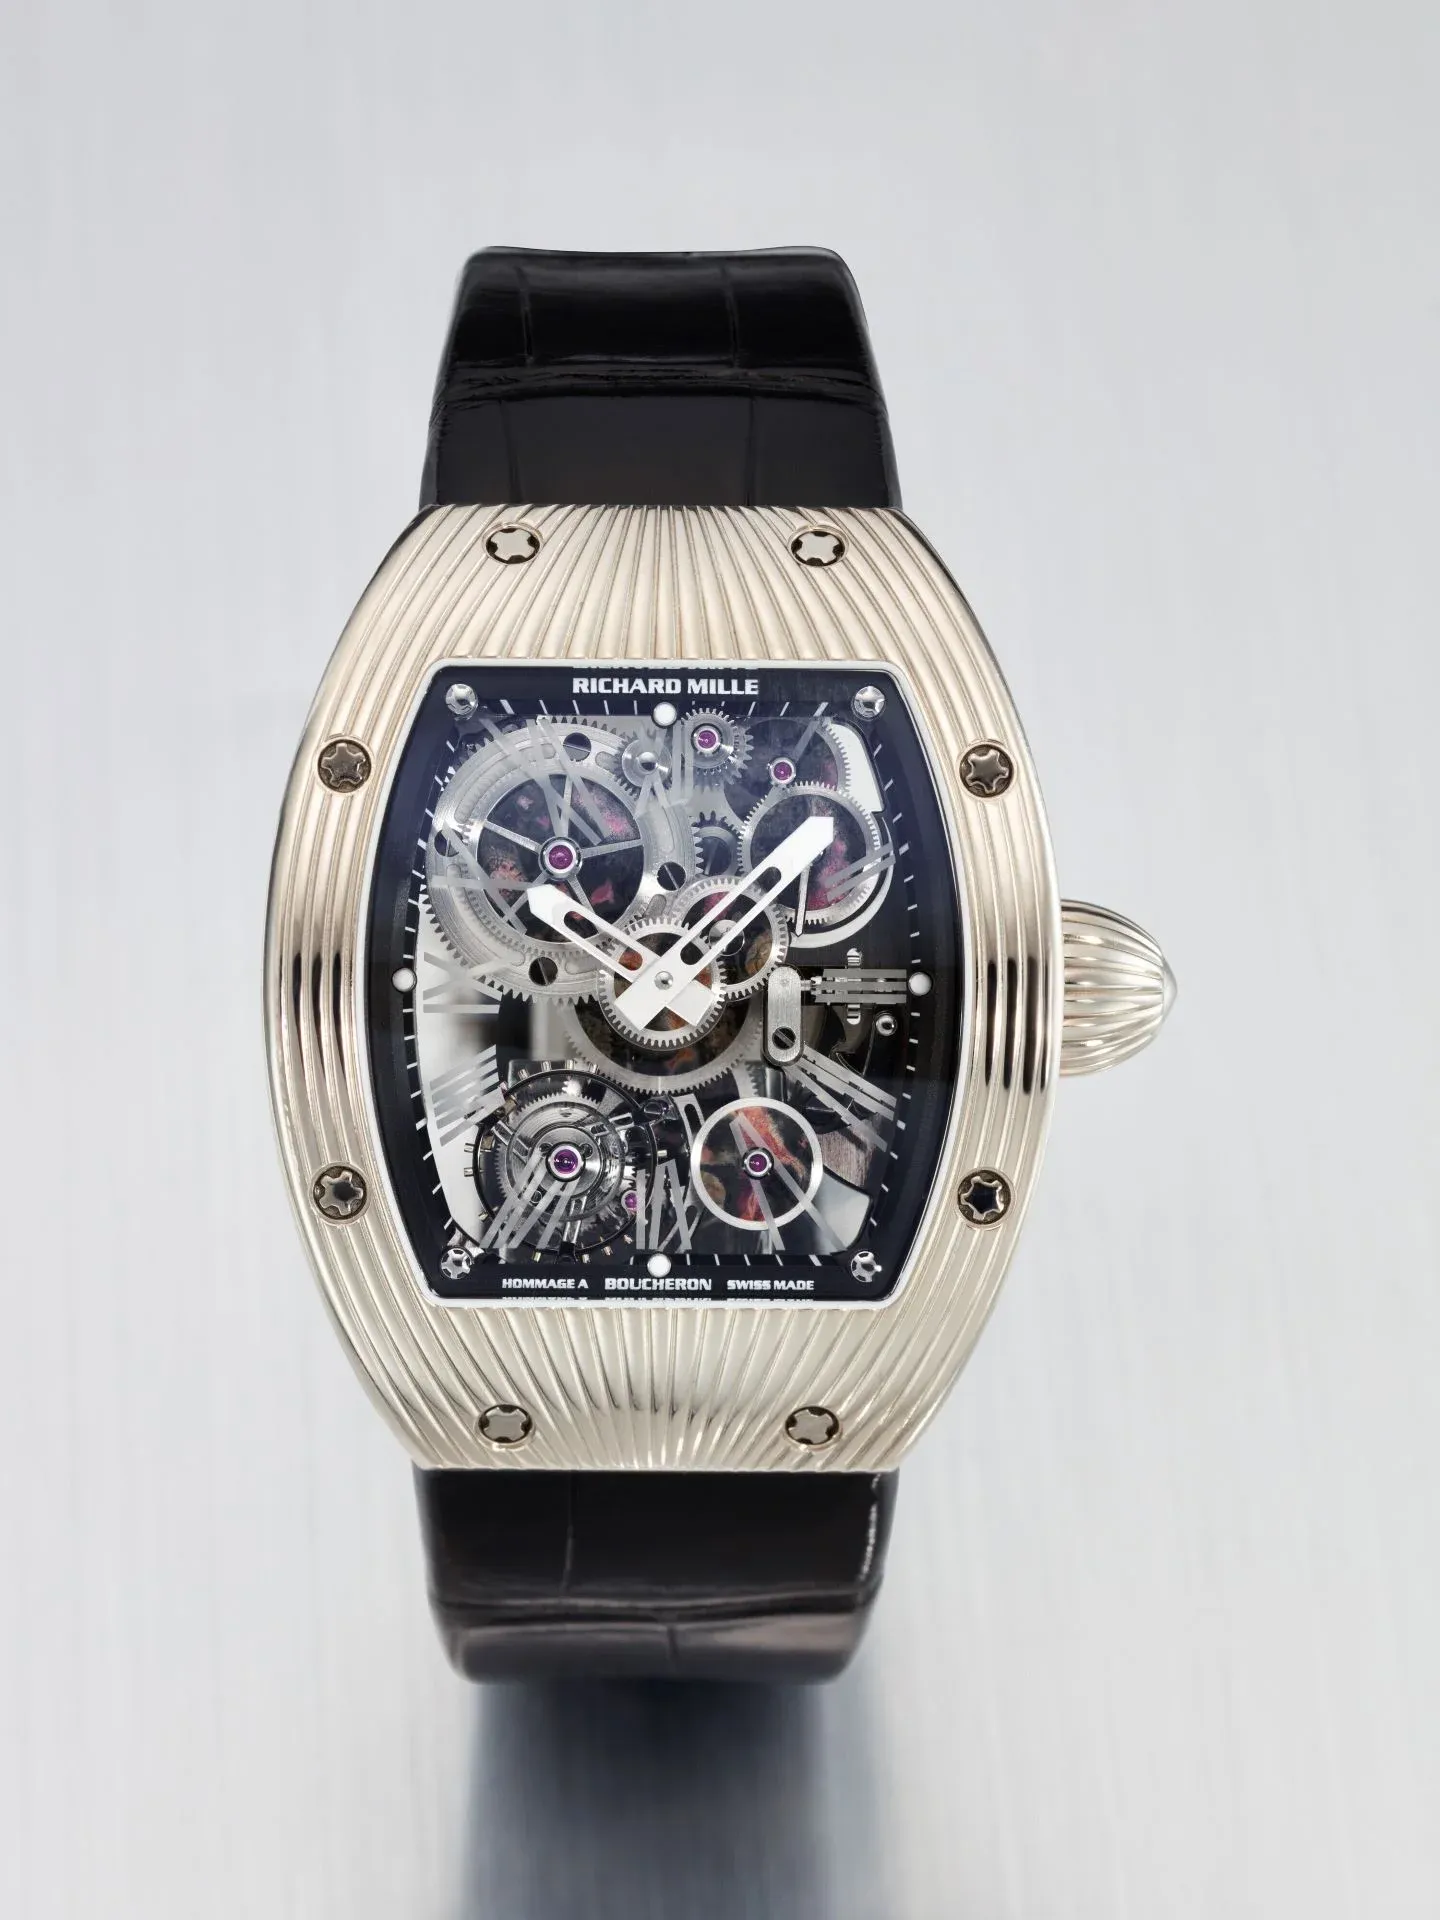 Christies NY Watches: Richard Mille Unique RM018 ‘Hommage A Boucheron